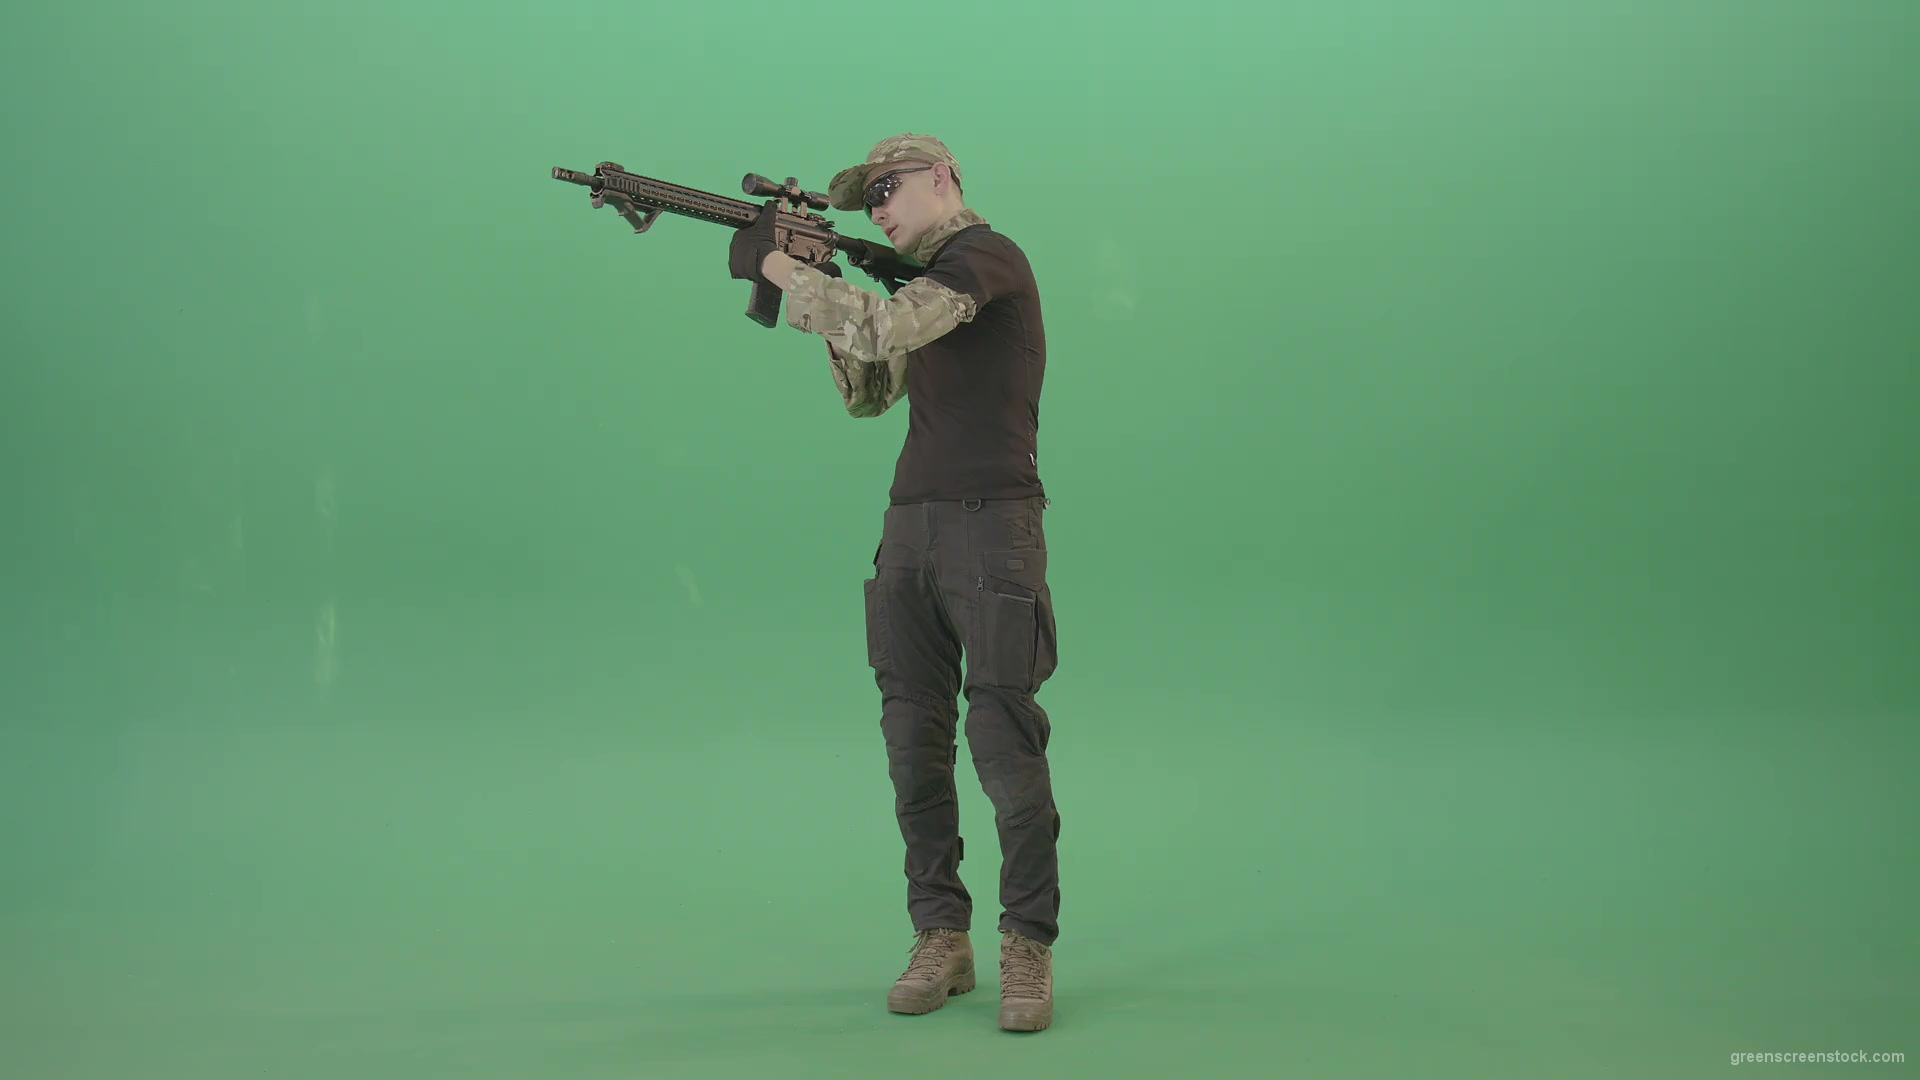 Man-in-Military-uniform-shooting-with-Army-machine-gun-isolated-on-Green-Screen-4K-Video-Footage-1920_001 Green Screen Stock